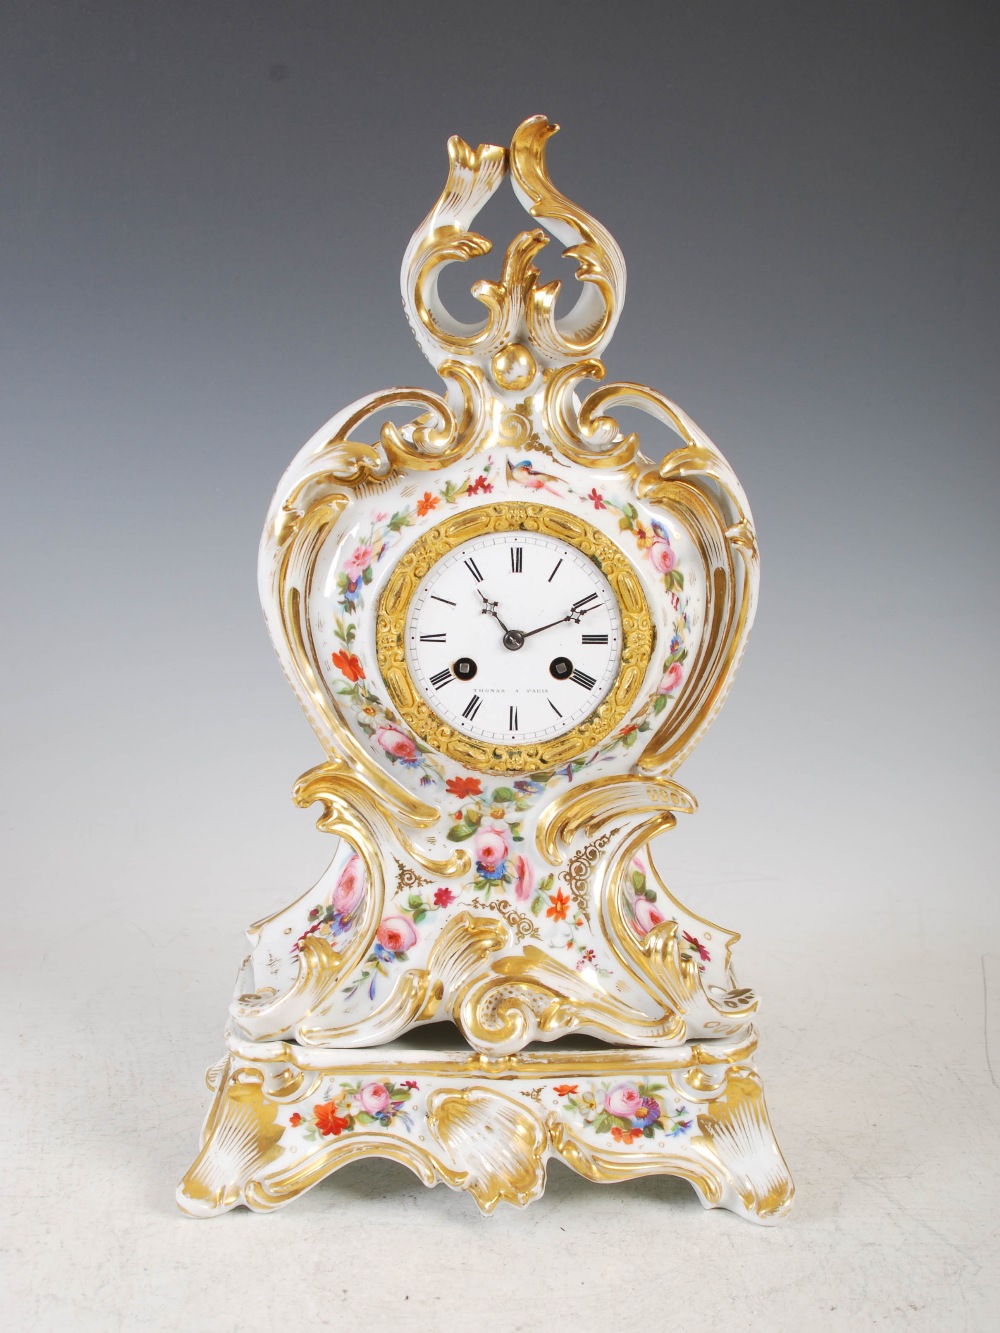 Thomas, Paris, a 19th century Paris porcelain and ormolu mounted Rococo style mantel clock on stand, - Image 2 of 13